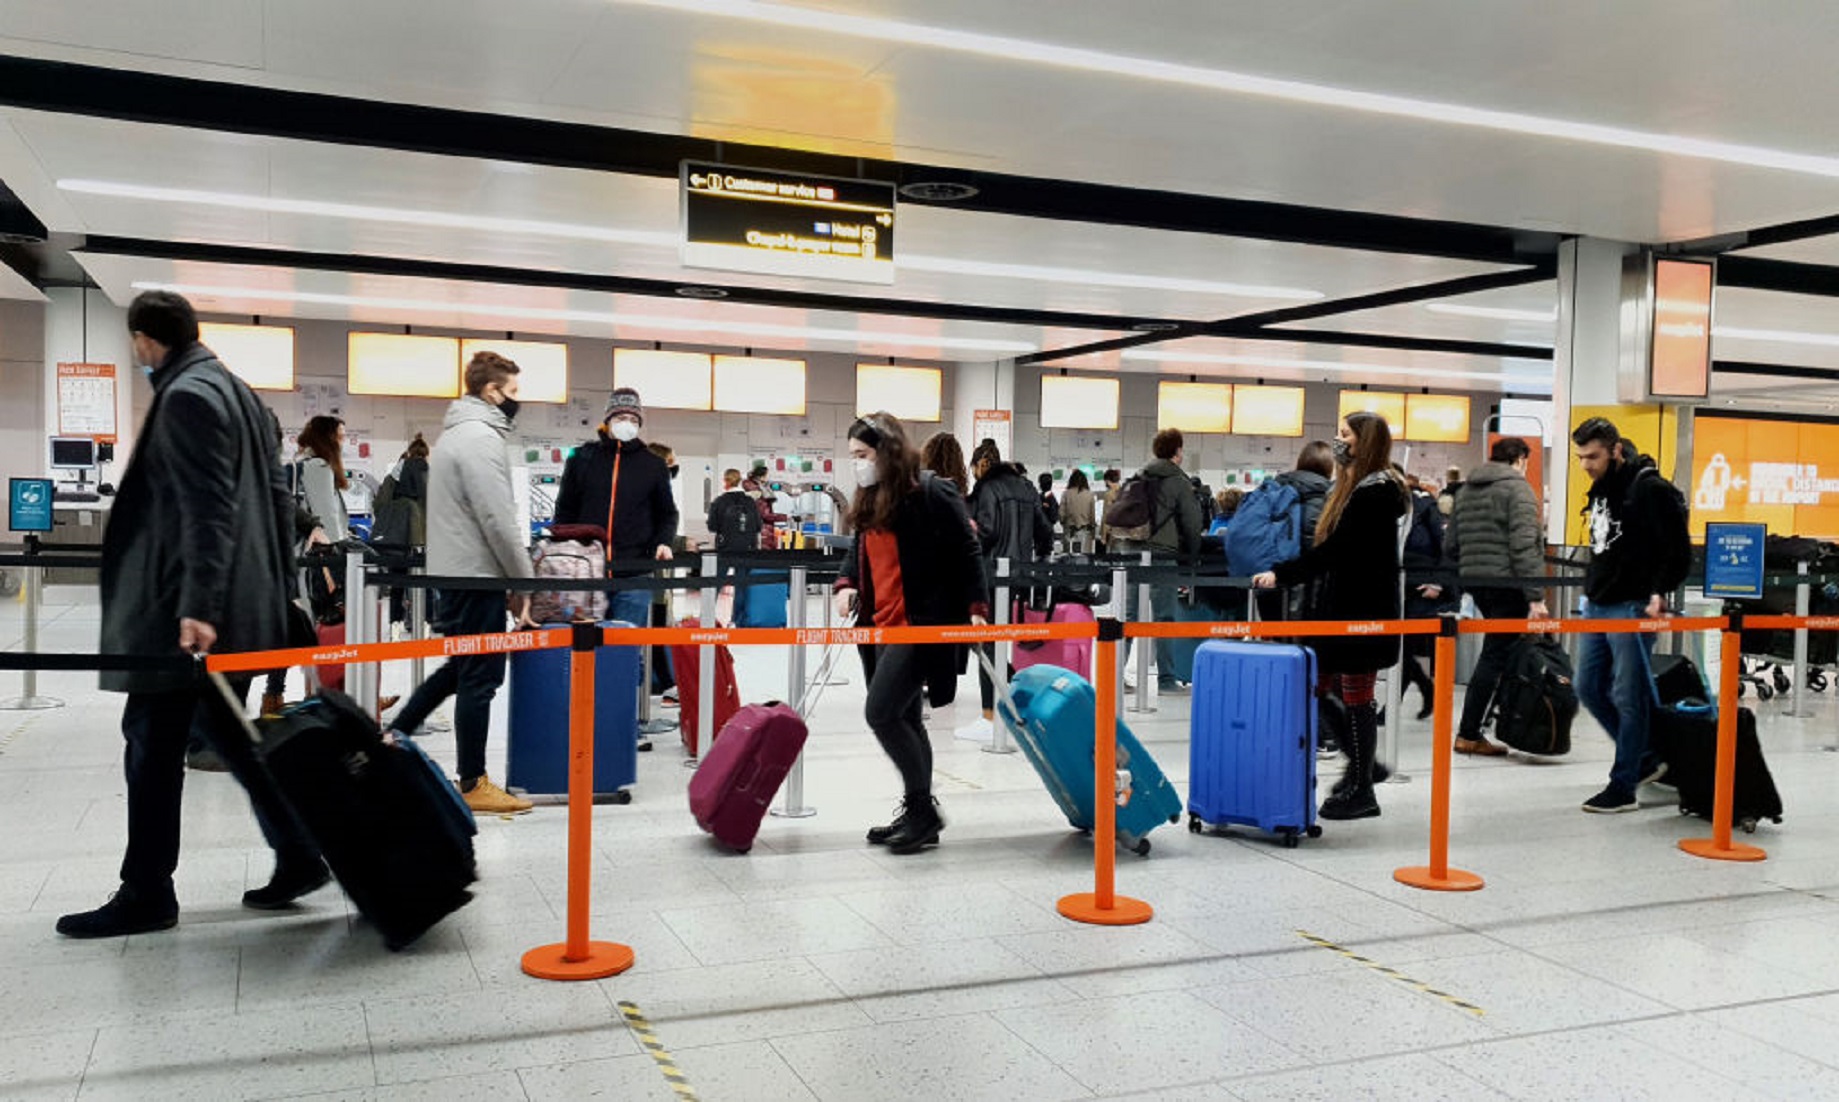 Egypt Announces New Travel Restrictions Amid COVID-19 Spread